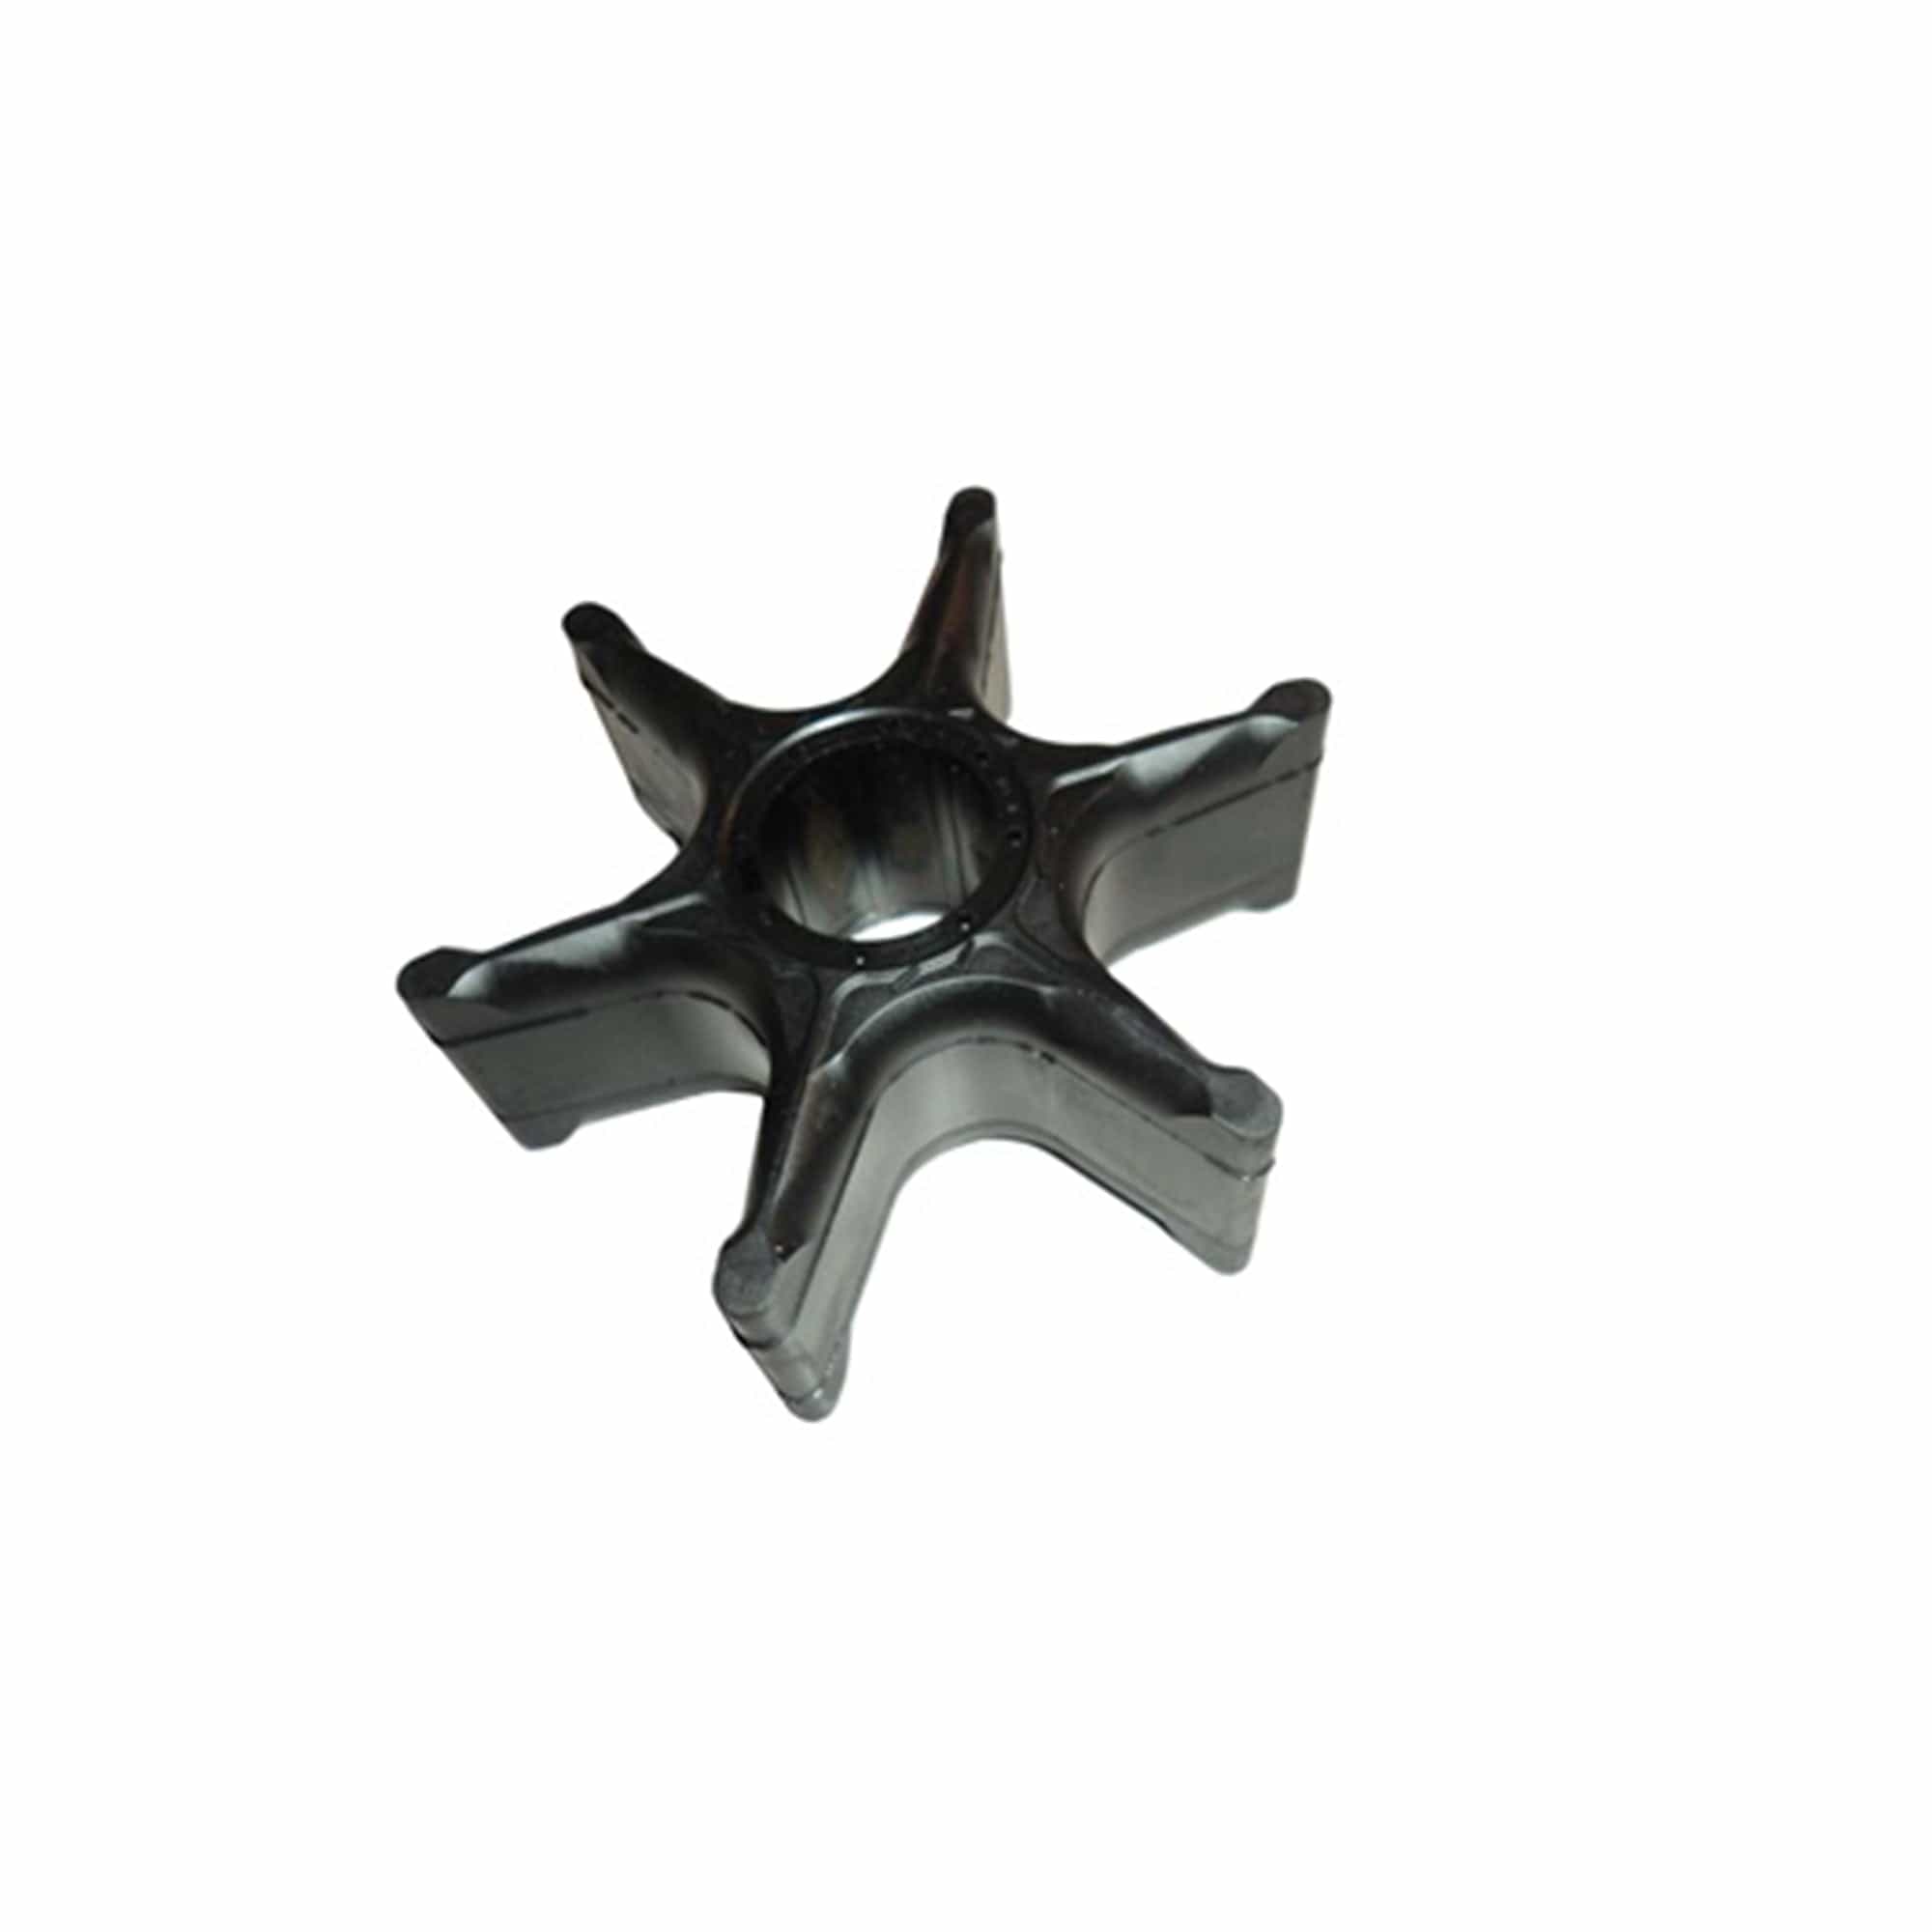 GLM Marine 89930 Impeller for Yamaha Replaces 6E5-44352-01-00